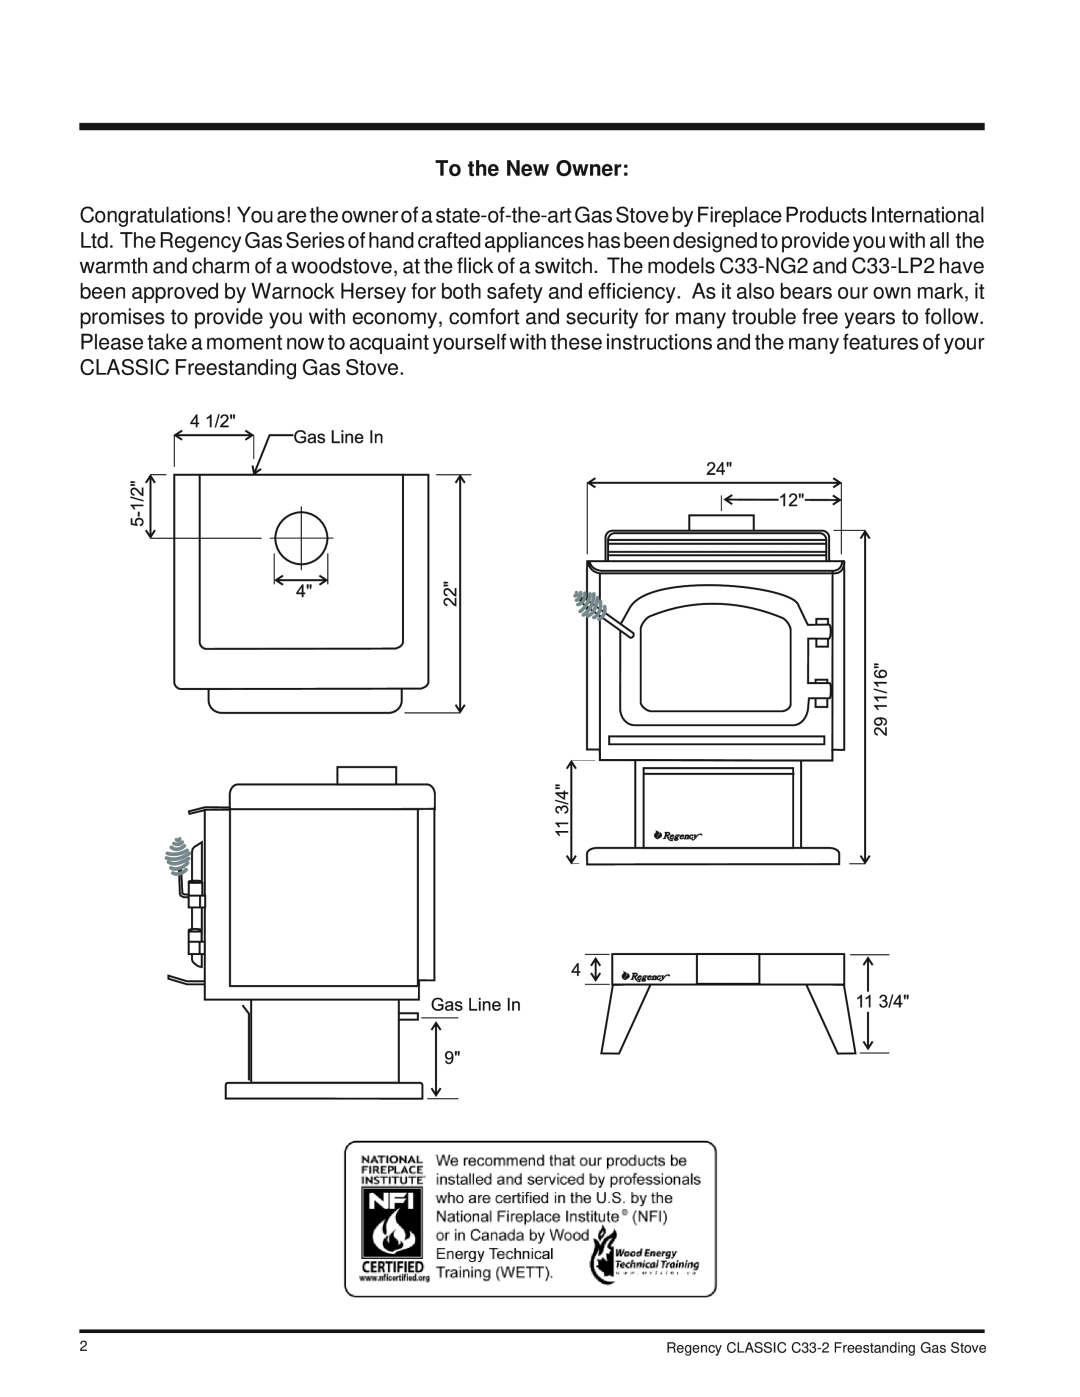 Regency C33-LP2, C33-NG2 installation manual To the New Owner, Regency CLASSIC C33-2Freestanding Gas Stove 